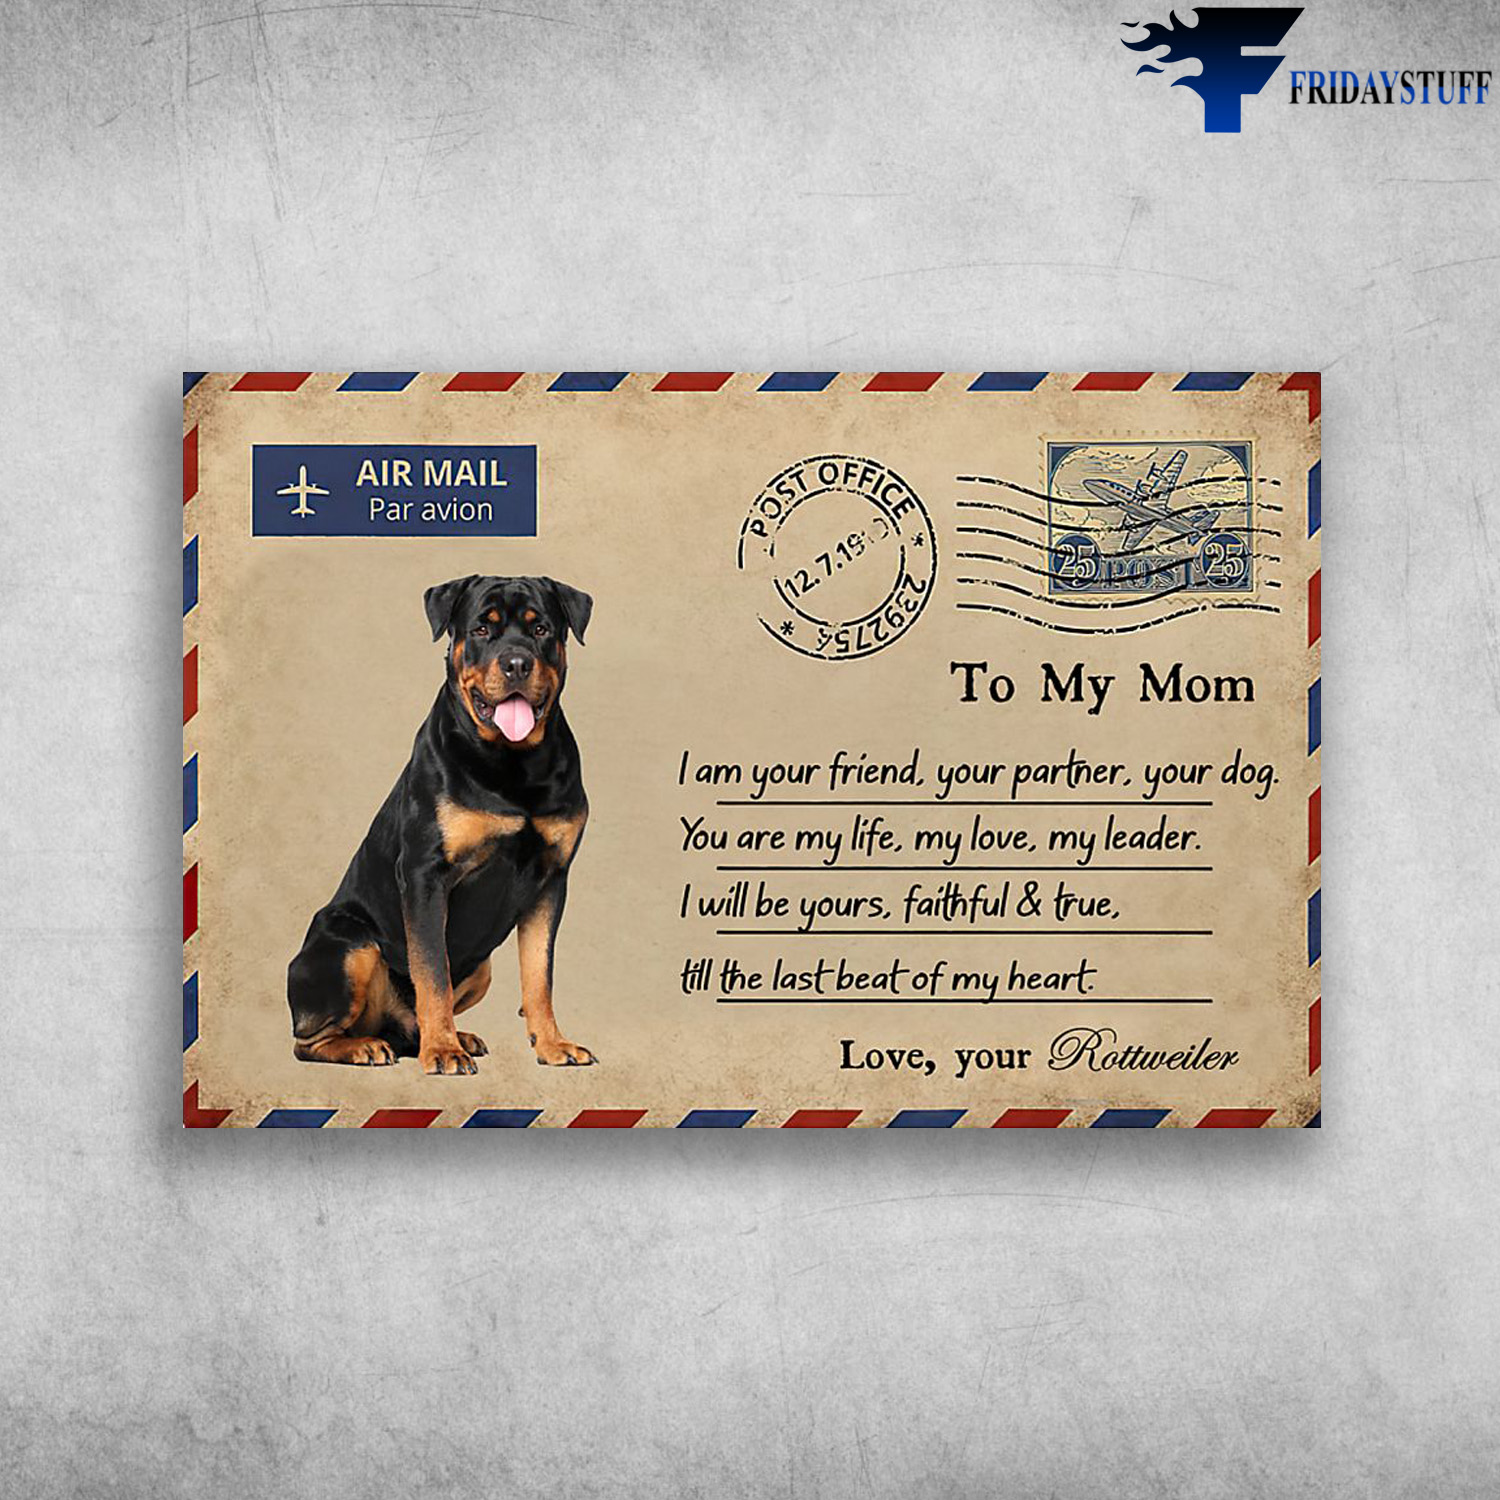 Rottweiler Dog – Air Mail Par Avion, To My Mom, I Am Your Friend, Your Partner, Your Dog, You Are My Life, My Love, My Leader, I Will Be Yours, Faithful And True, Till The Last Beat Of My Heart, Love, Your Rottweiler